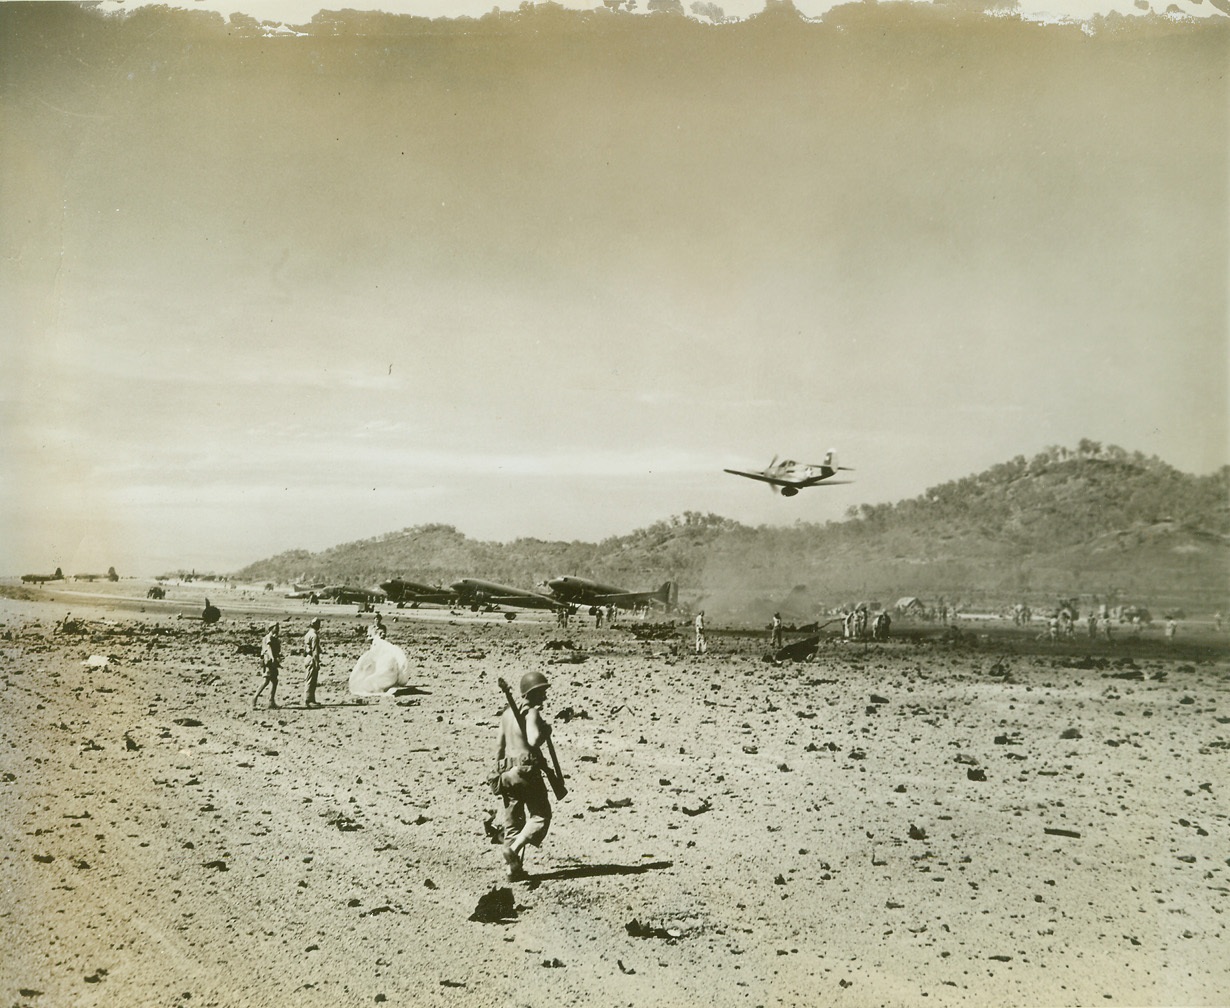 A debris-strewn airfield, 9/17/1942. New Guinea—A debris-strewn airfield marks the end of a surprise Jap raid on the Allied base of Port Moresby. An American P-39 circles low over the landing field to see if the terrain is in shape for a landing. American and Australian soldiers pick up scraps of wood and metal and repair damage which was not great.  Credit: ACME;